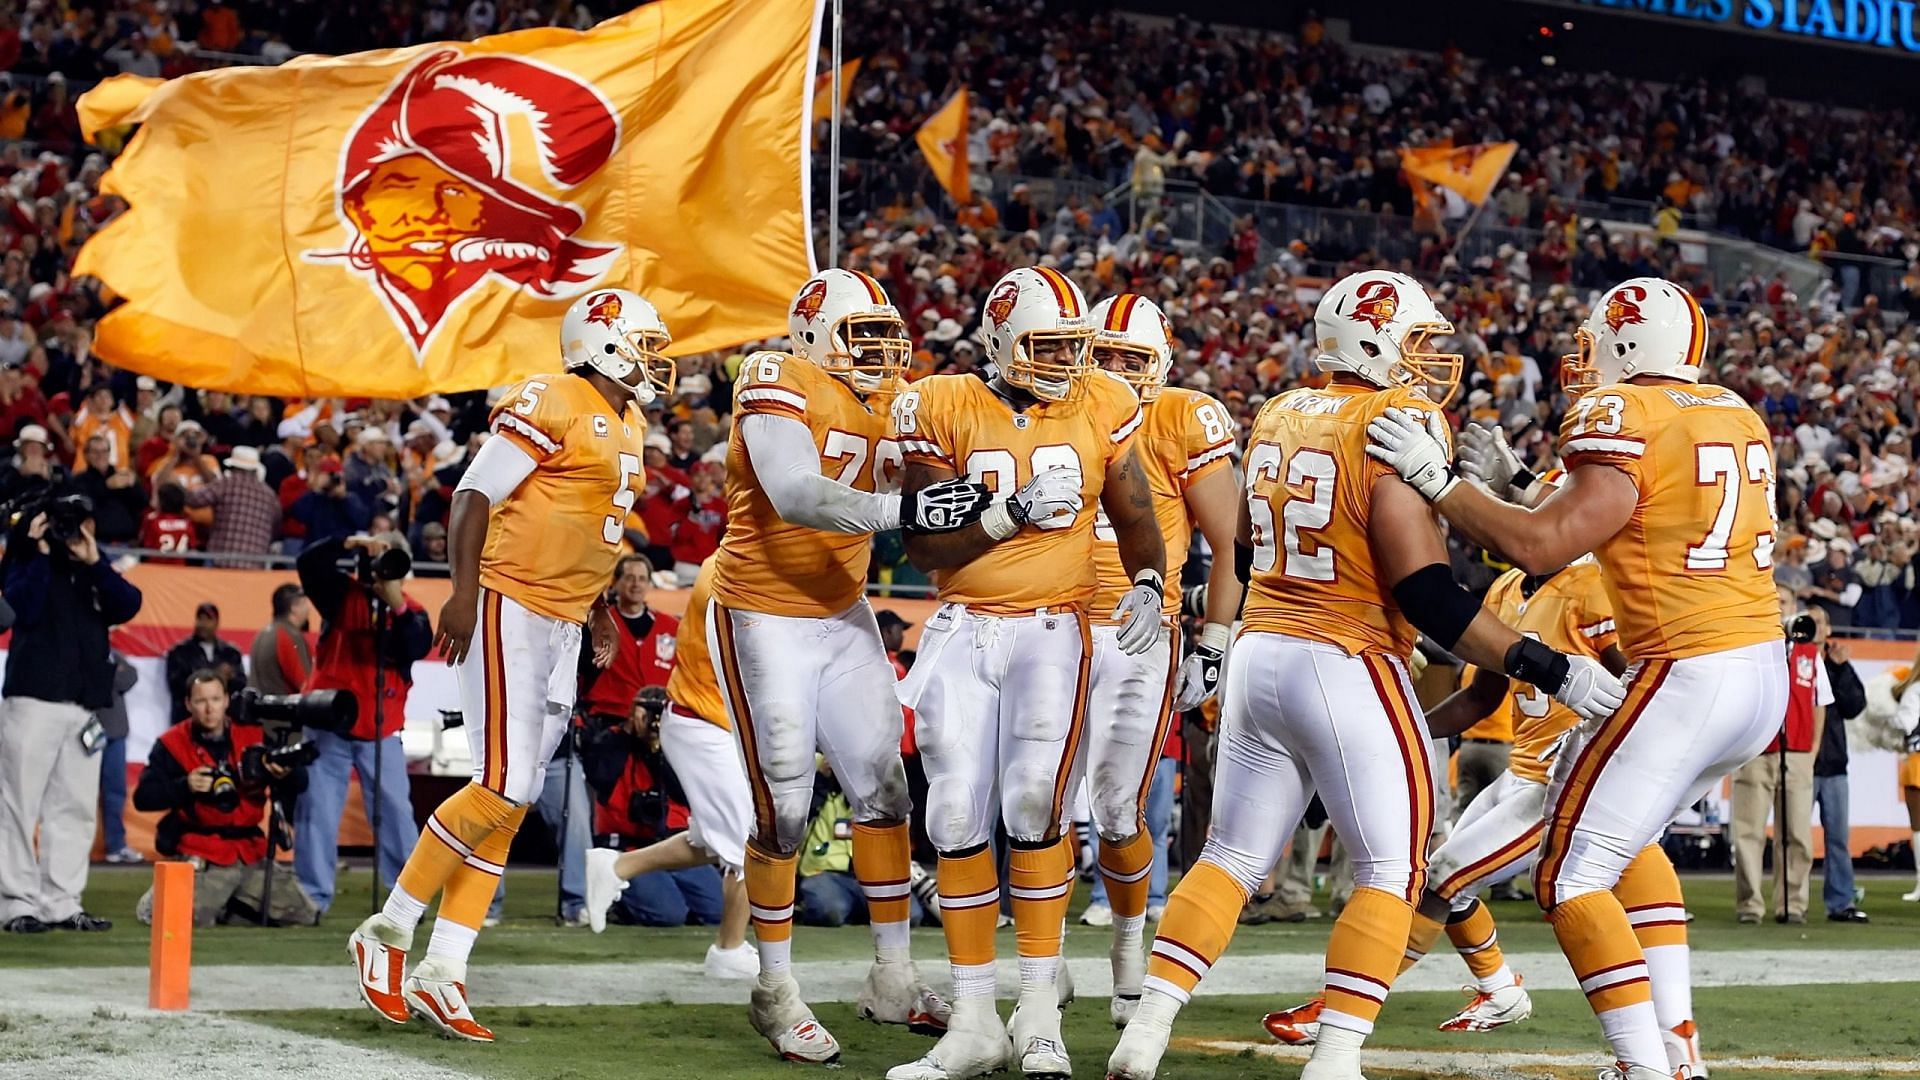 The Tampa Bay Buccaneers celebrates in their creamsicle uniform